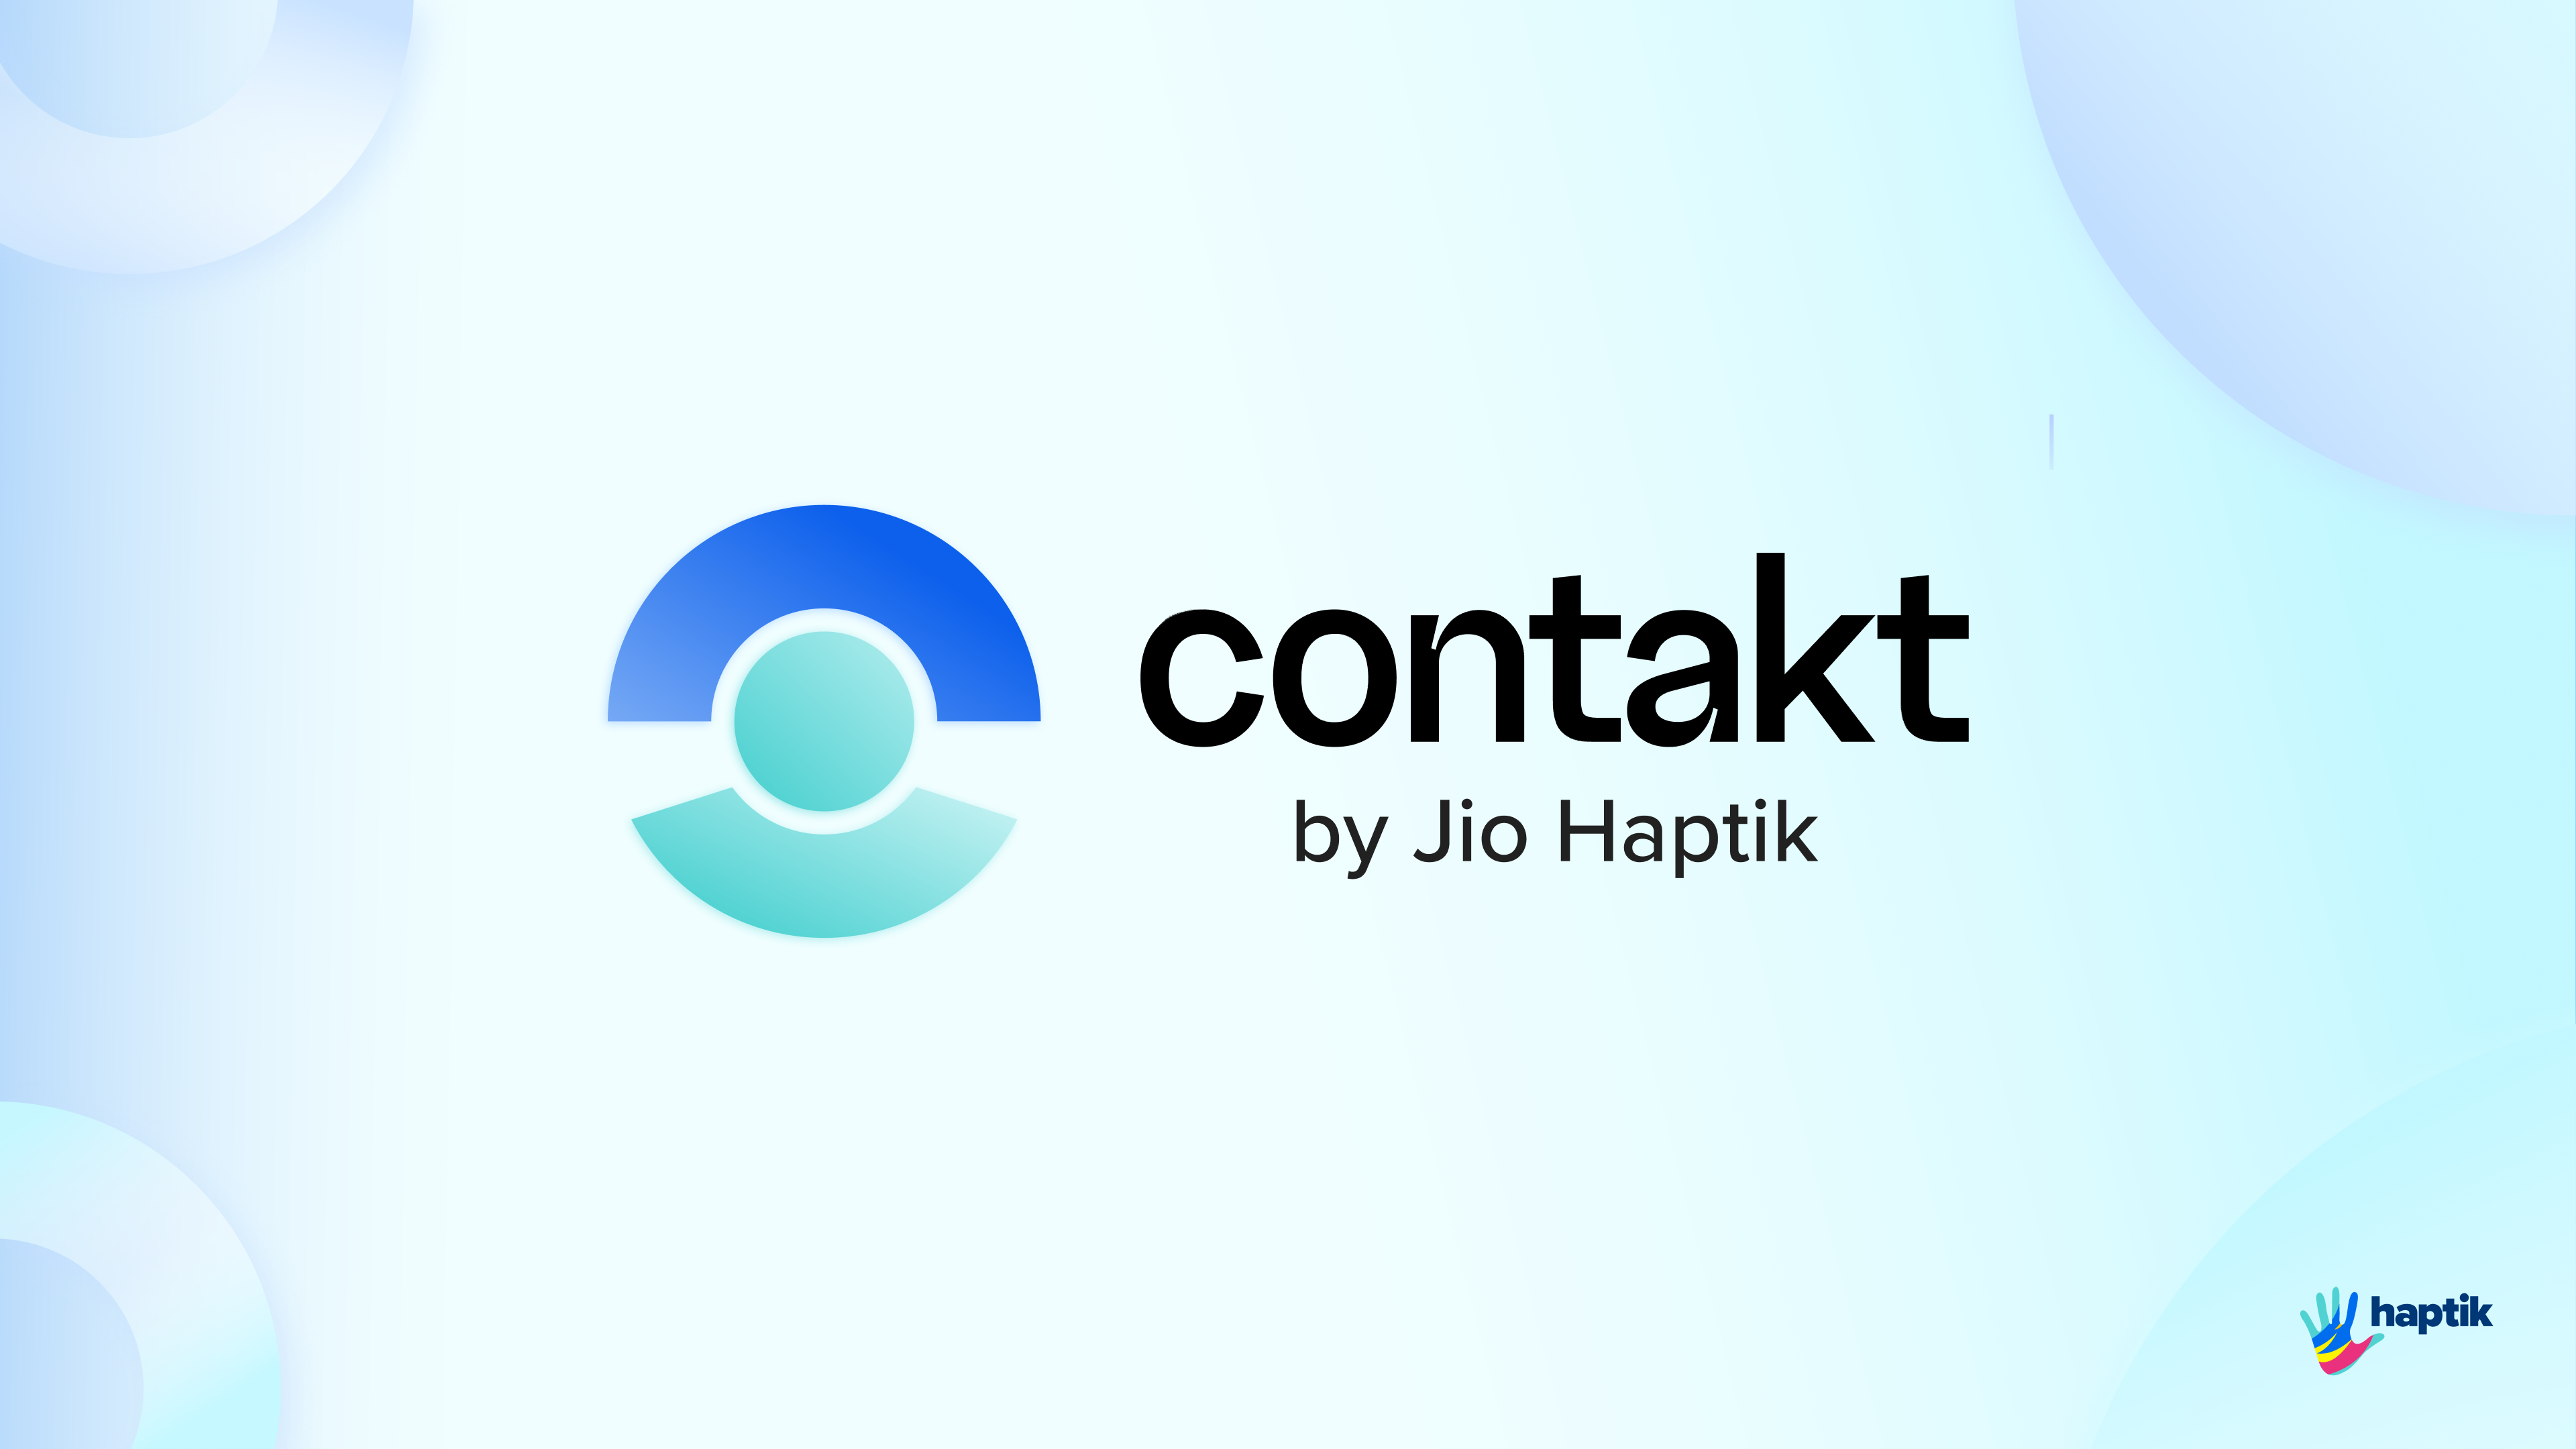 Introducing Contakt: Welcoming a New Era in Customer Experience with  Generative AI